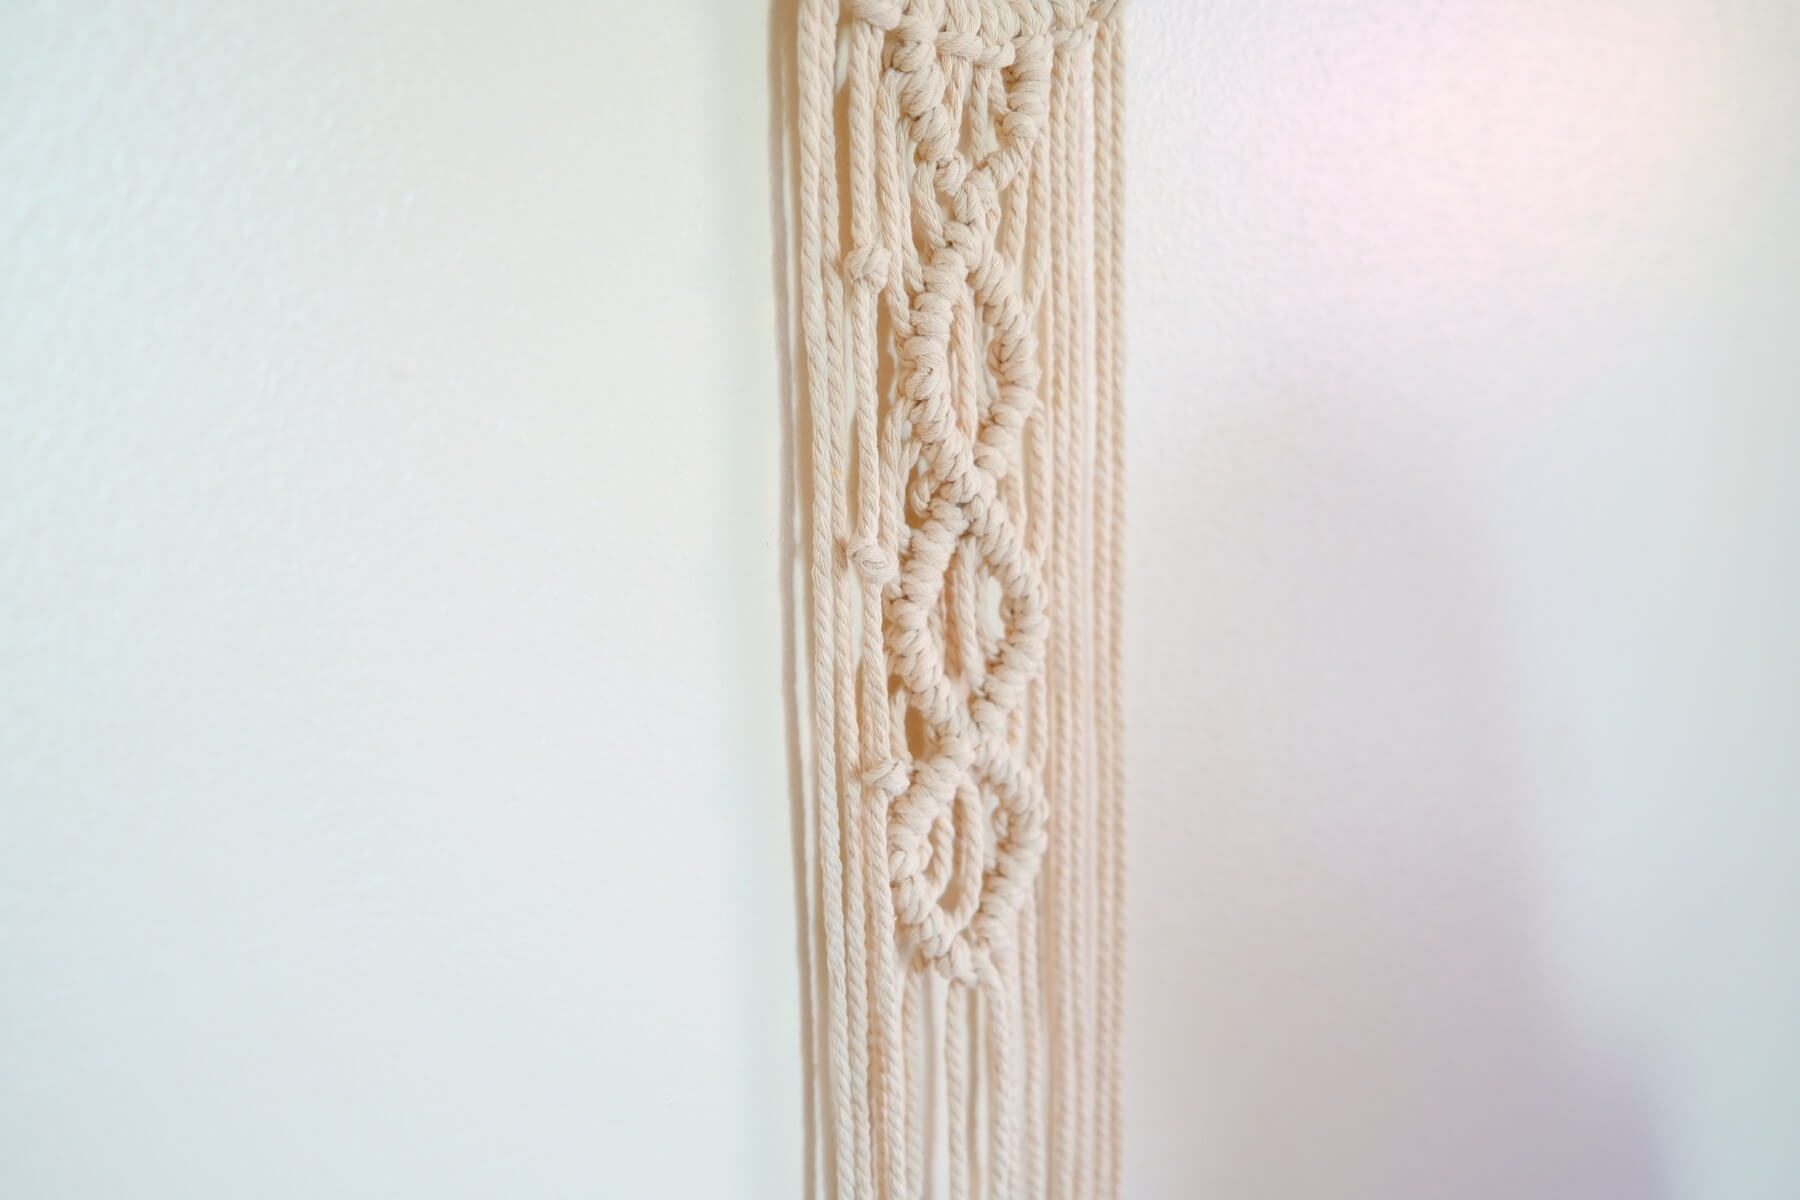 finished side of the macrame wall hanging